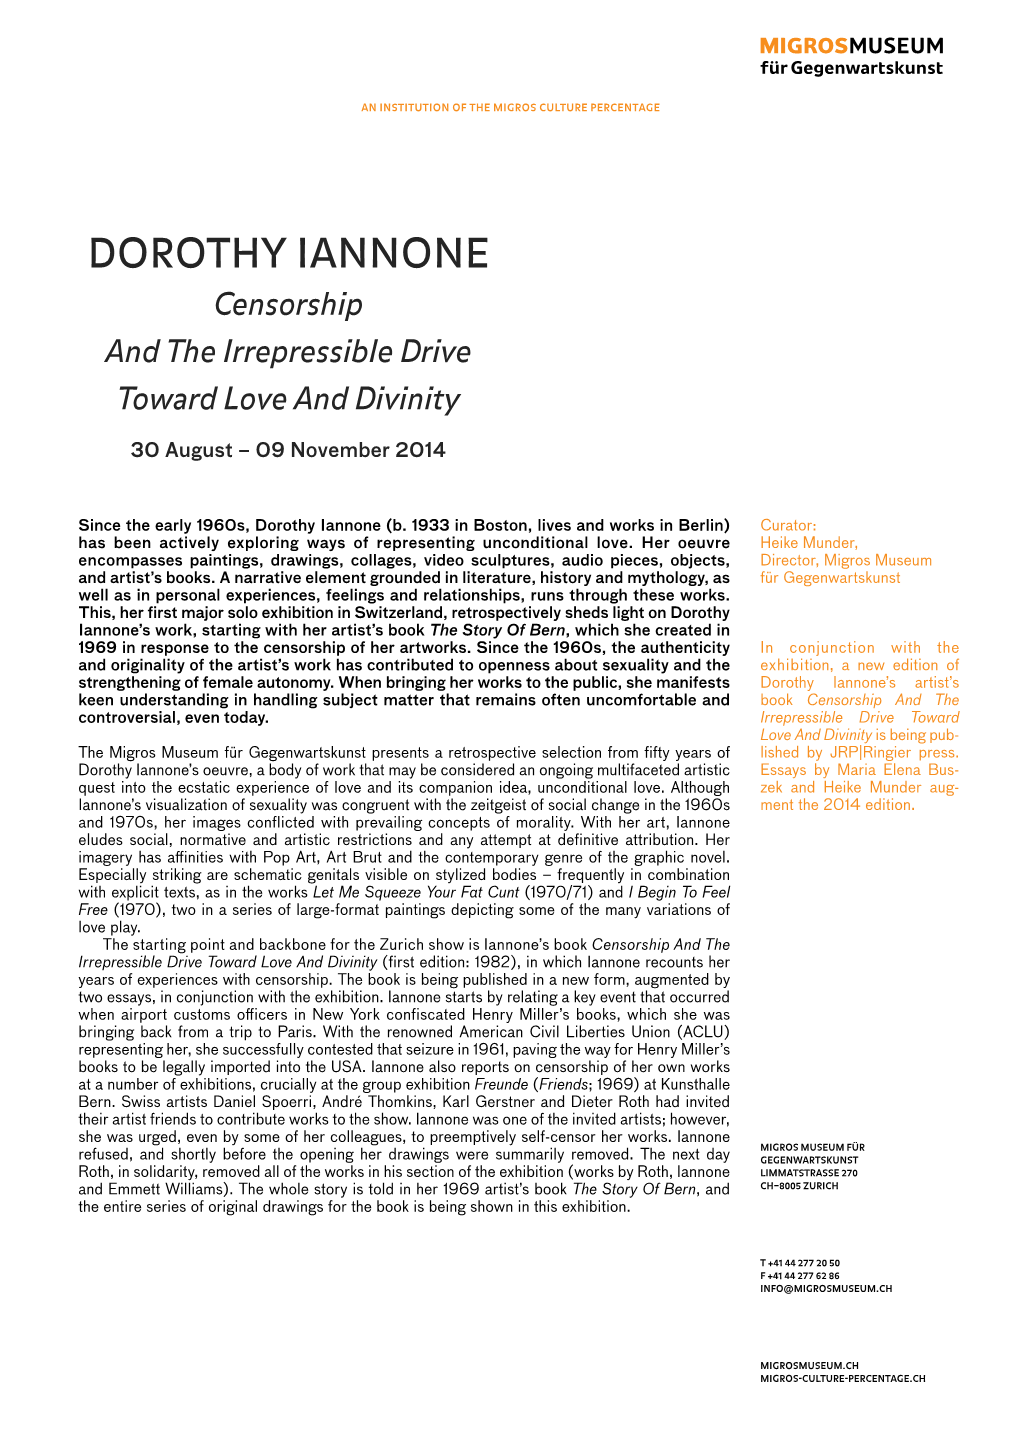 Dorothy Iannone Censorship and the Irrepressible Drive Toward Love and Divinity